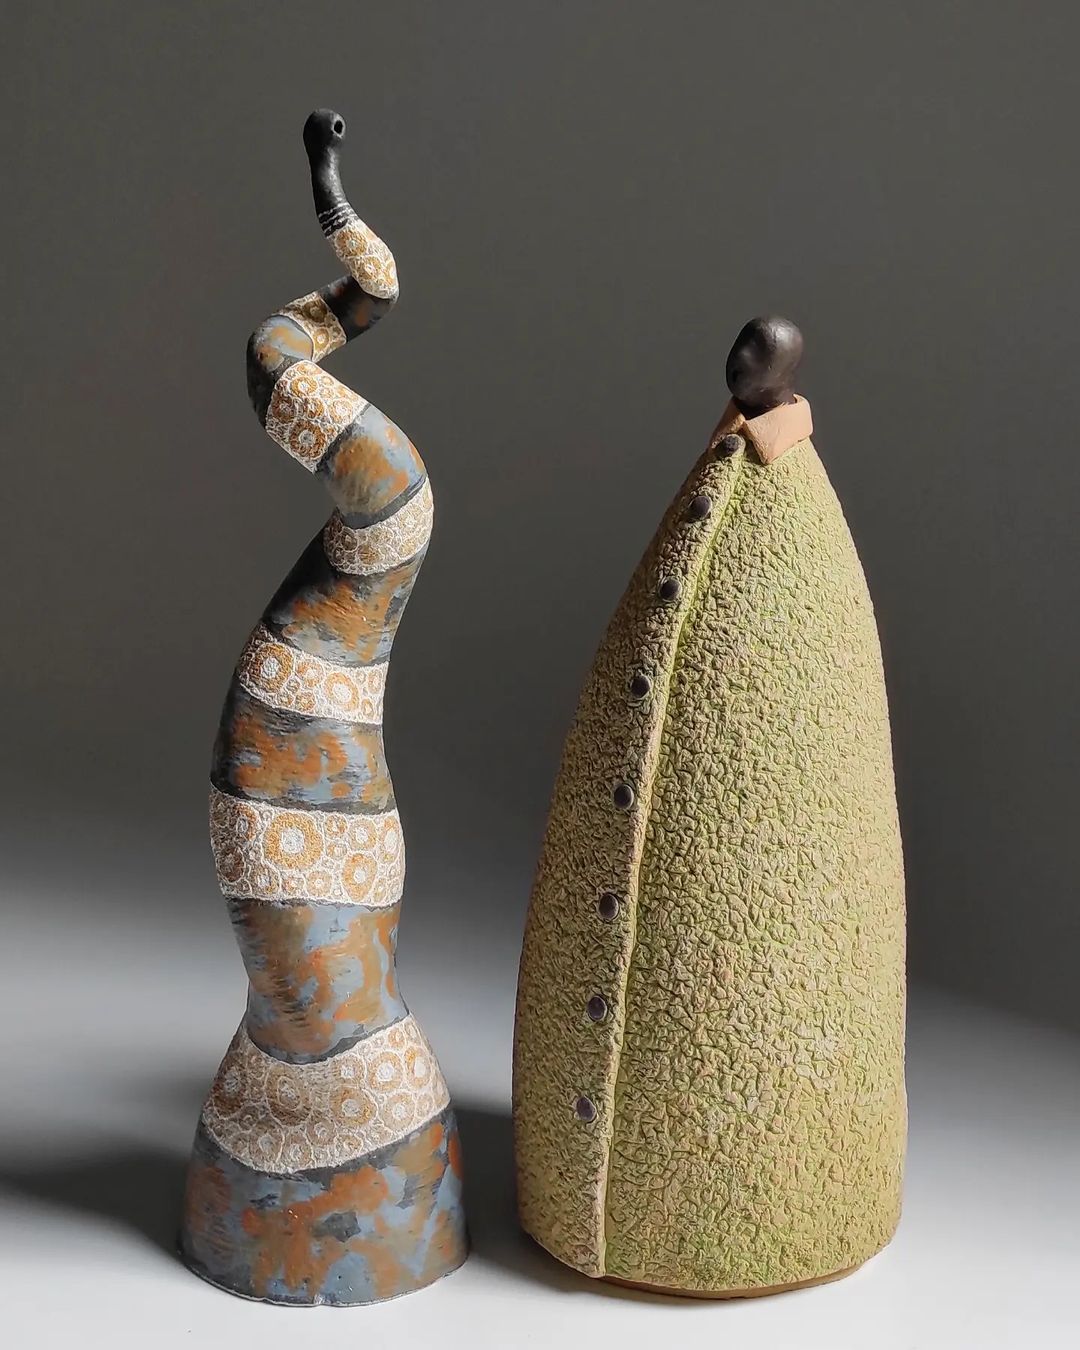 Abstract Figurative Ceramic Sculptures By Carlos Cabo (21)